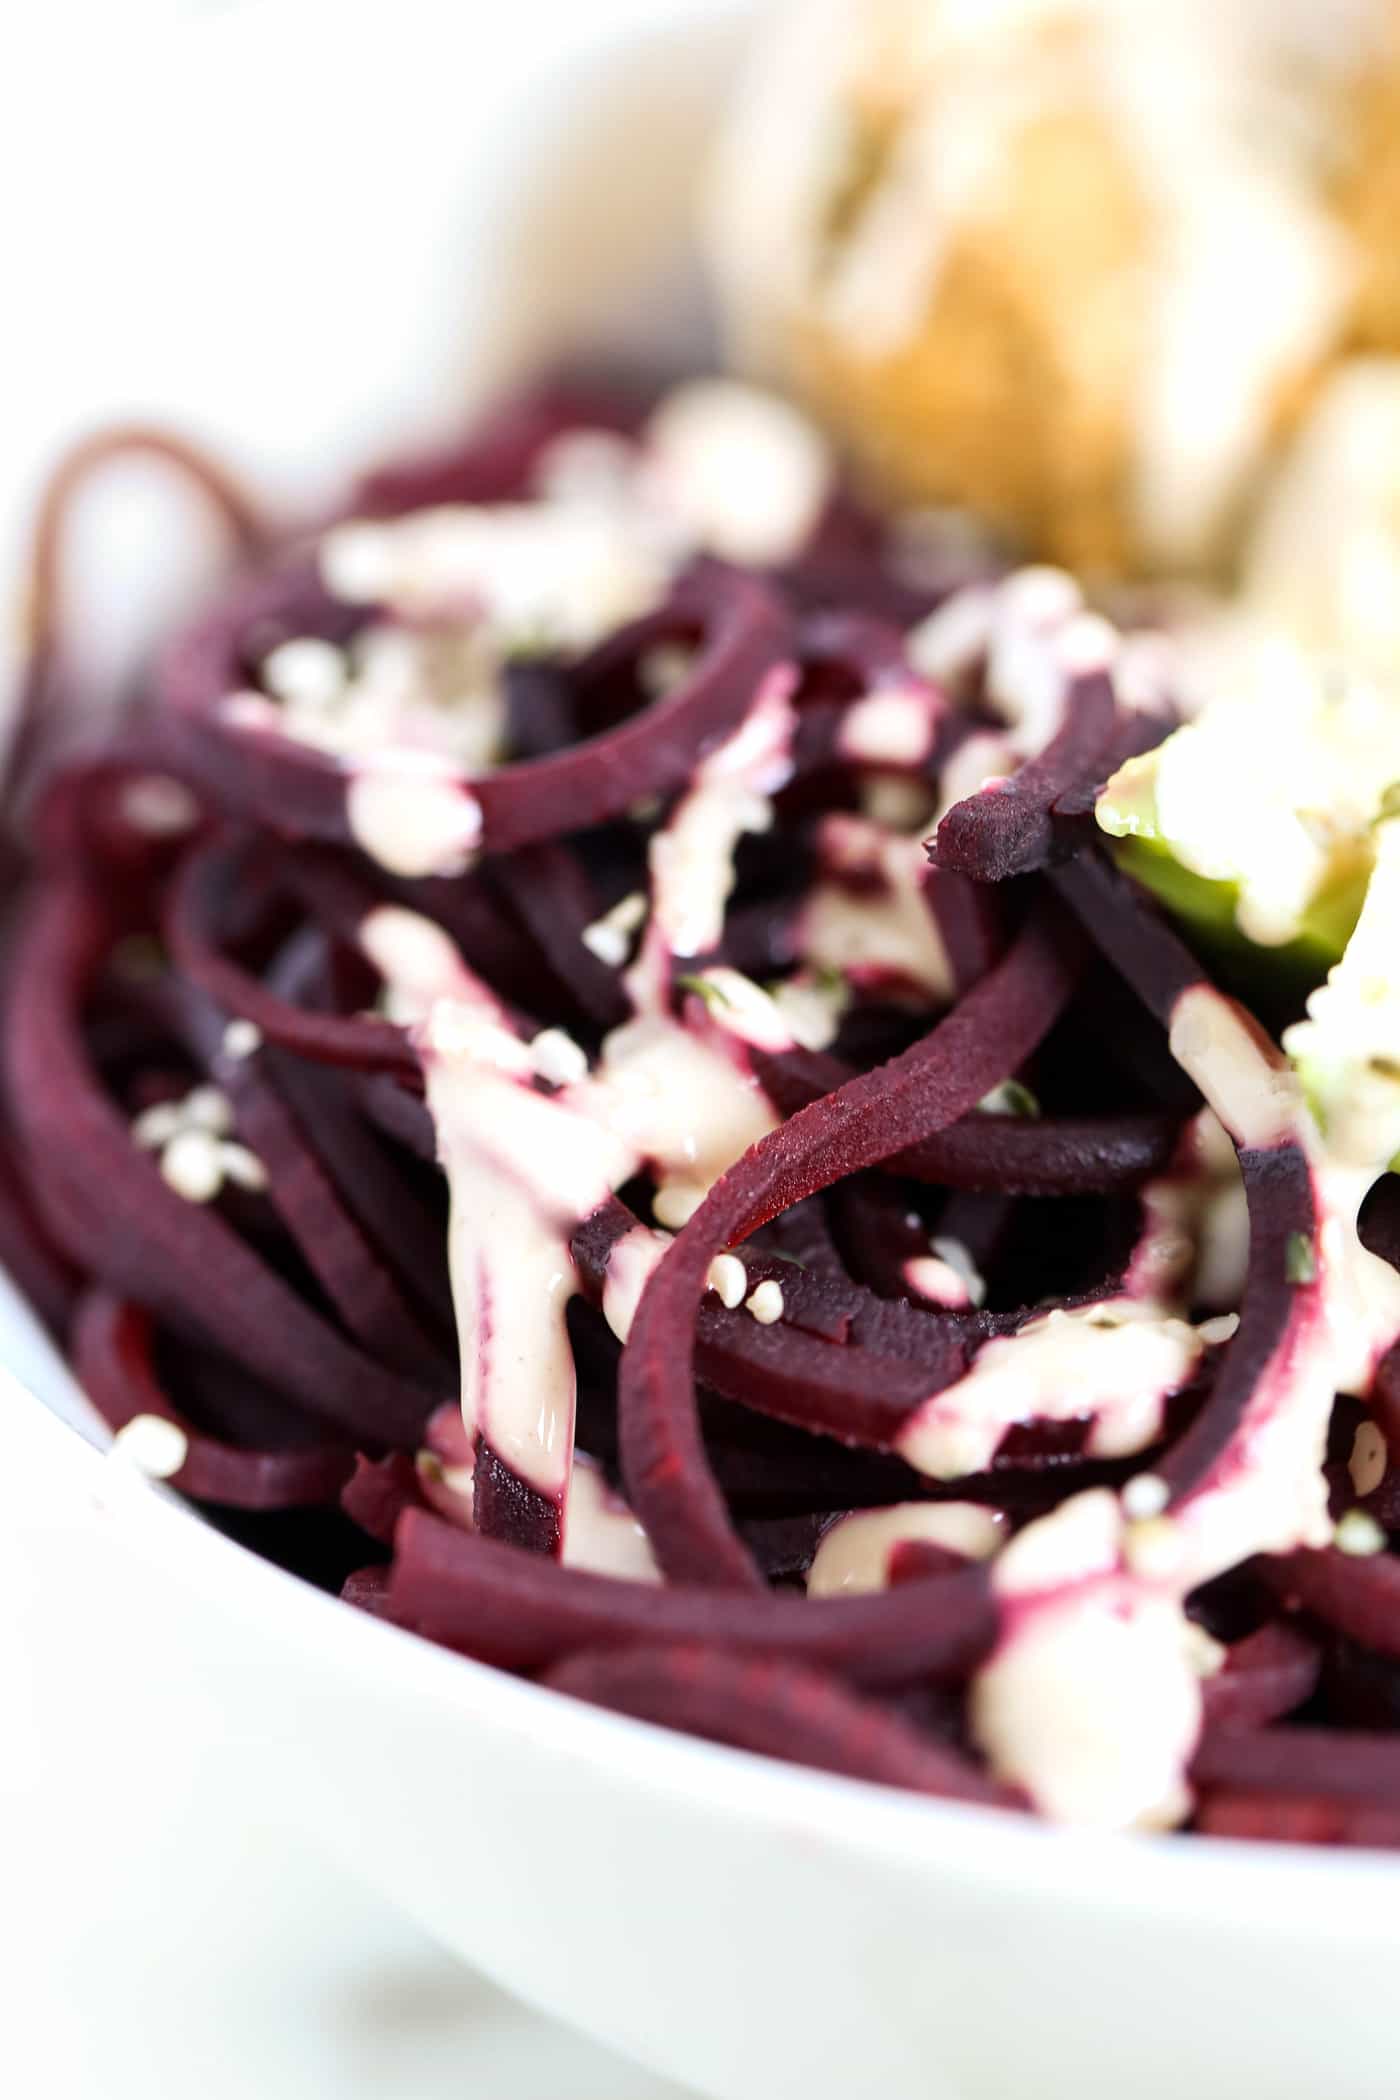 Roasted Beet Noodles with a creamy tahini sauce!